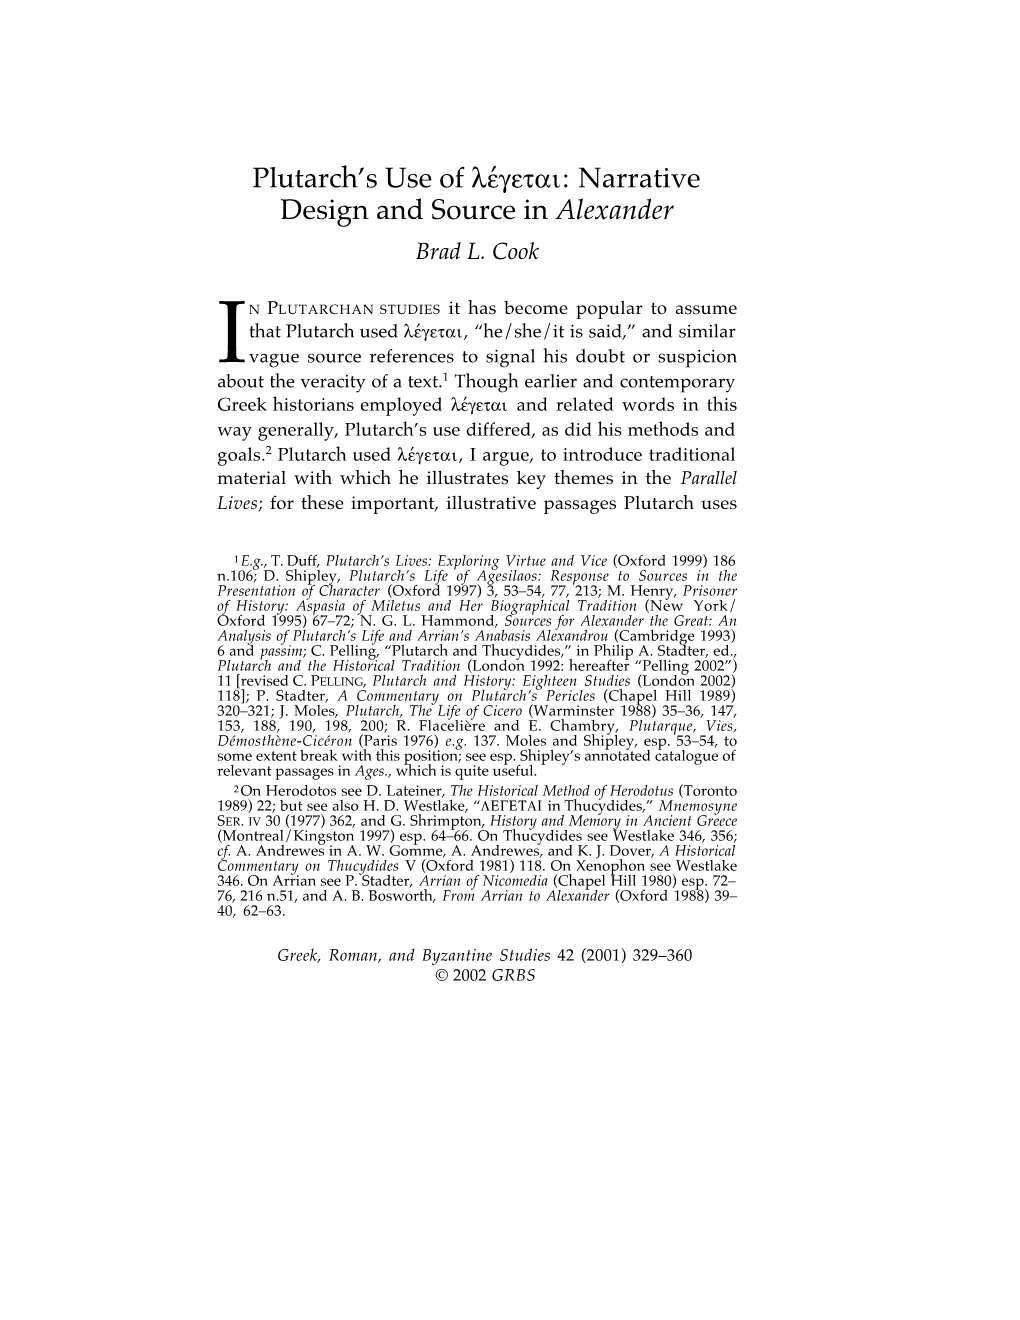 Plutarch's Use of Λέγεται: Narrative Design and Source in Alexander